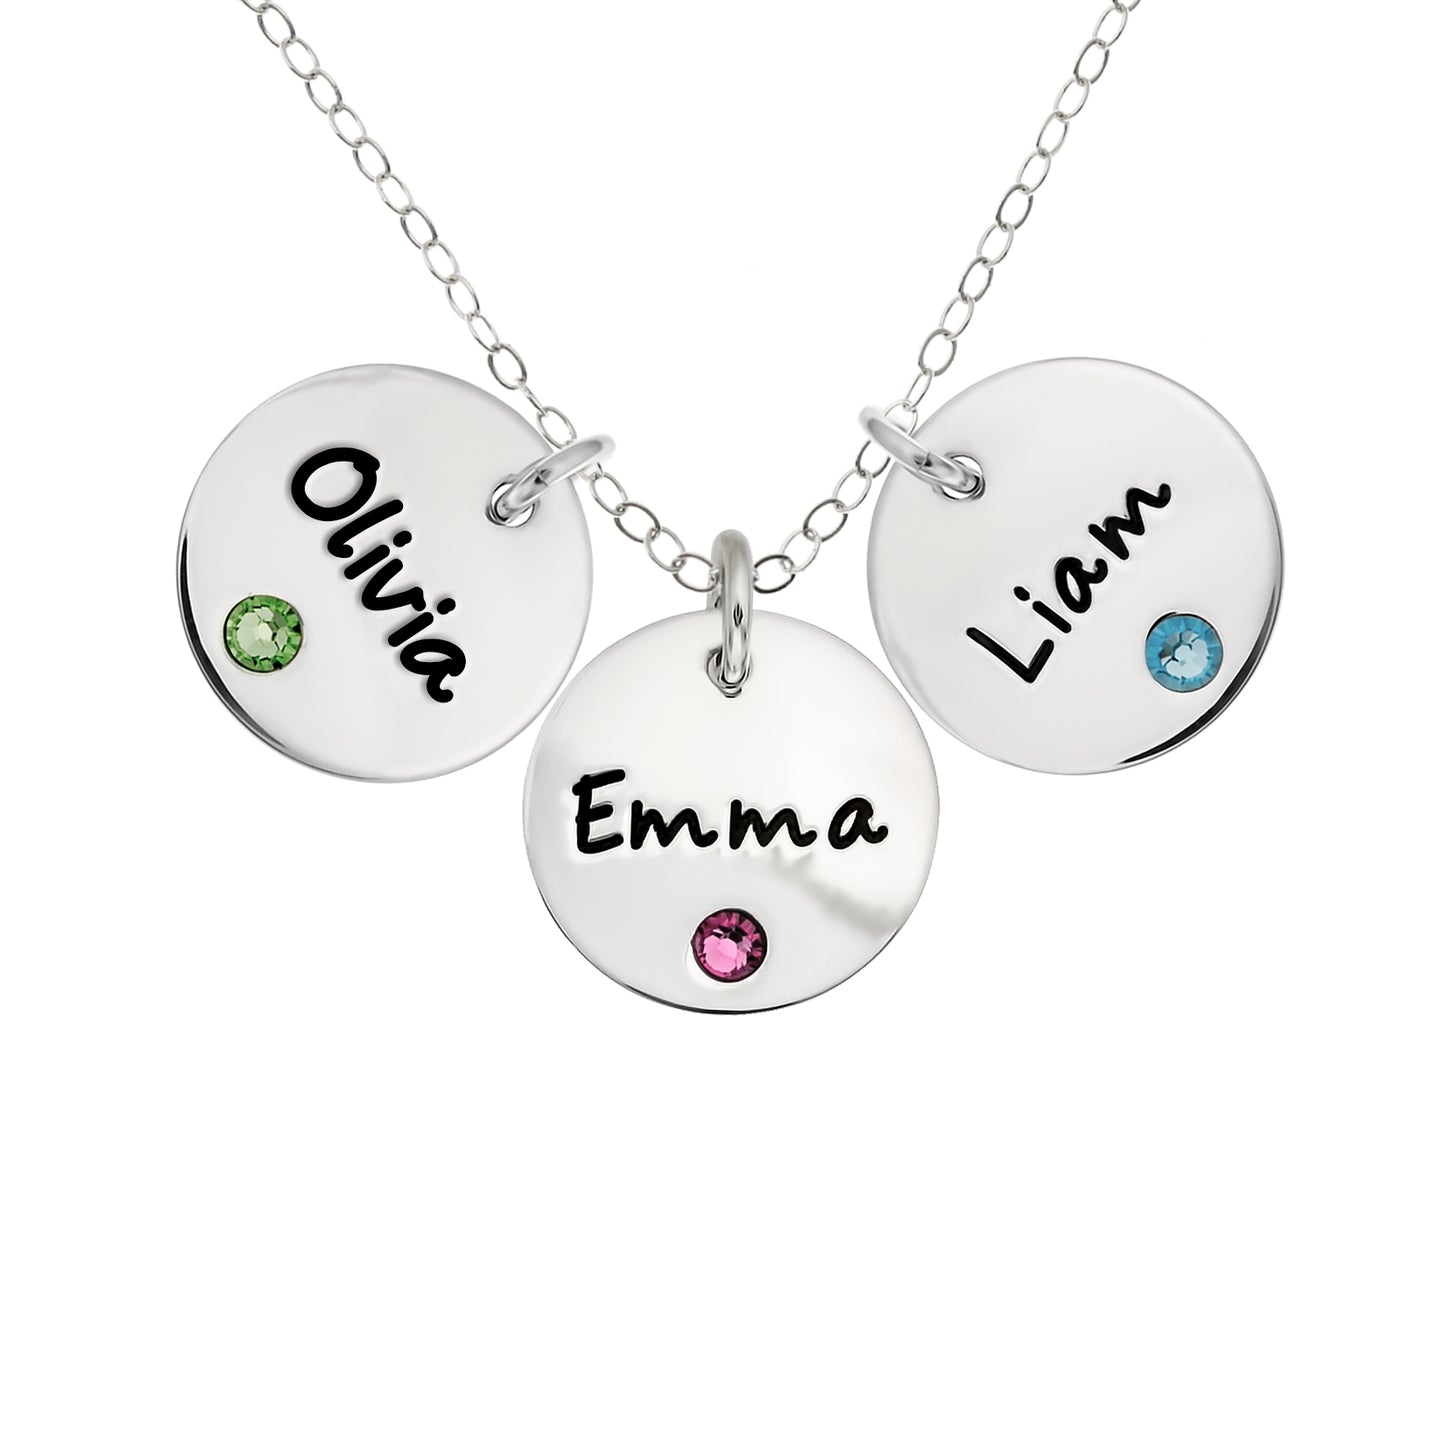 Personalized Sterling Silver Triple Round Name Charm Necklace with Choice of Swarovski Birthstone Settings